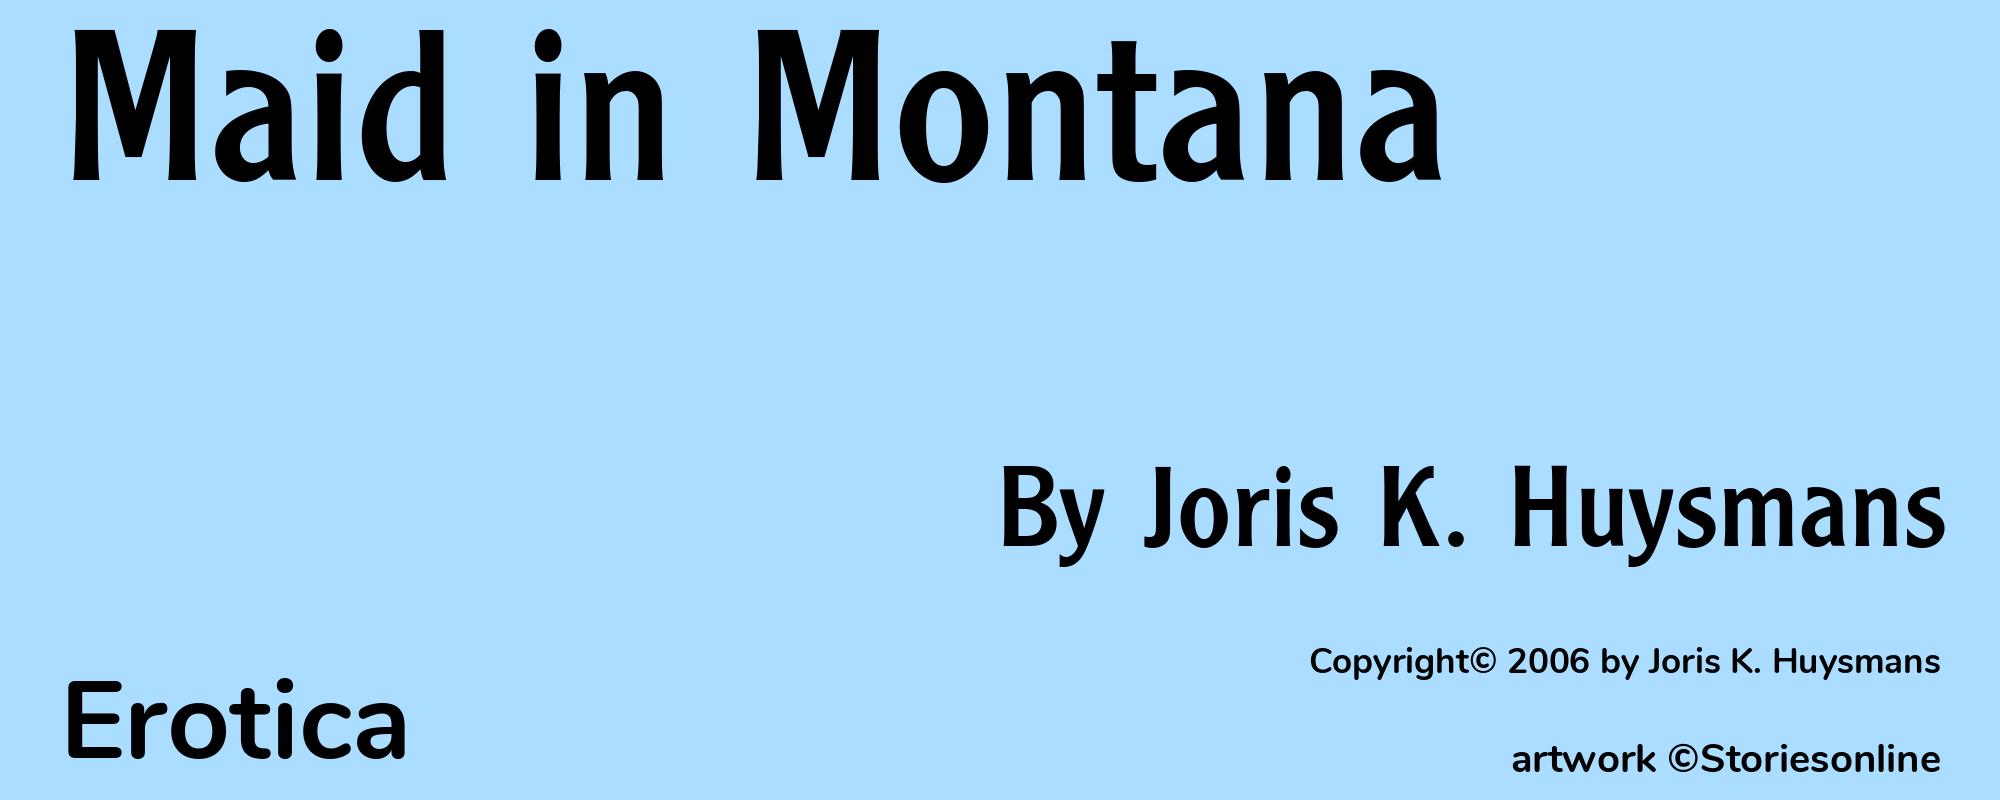 Maid in Montana - Cover